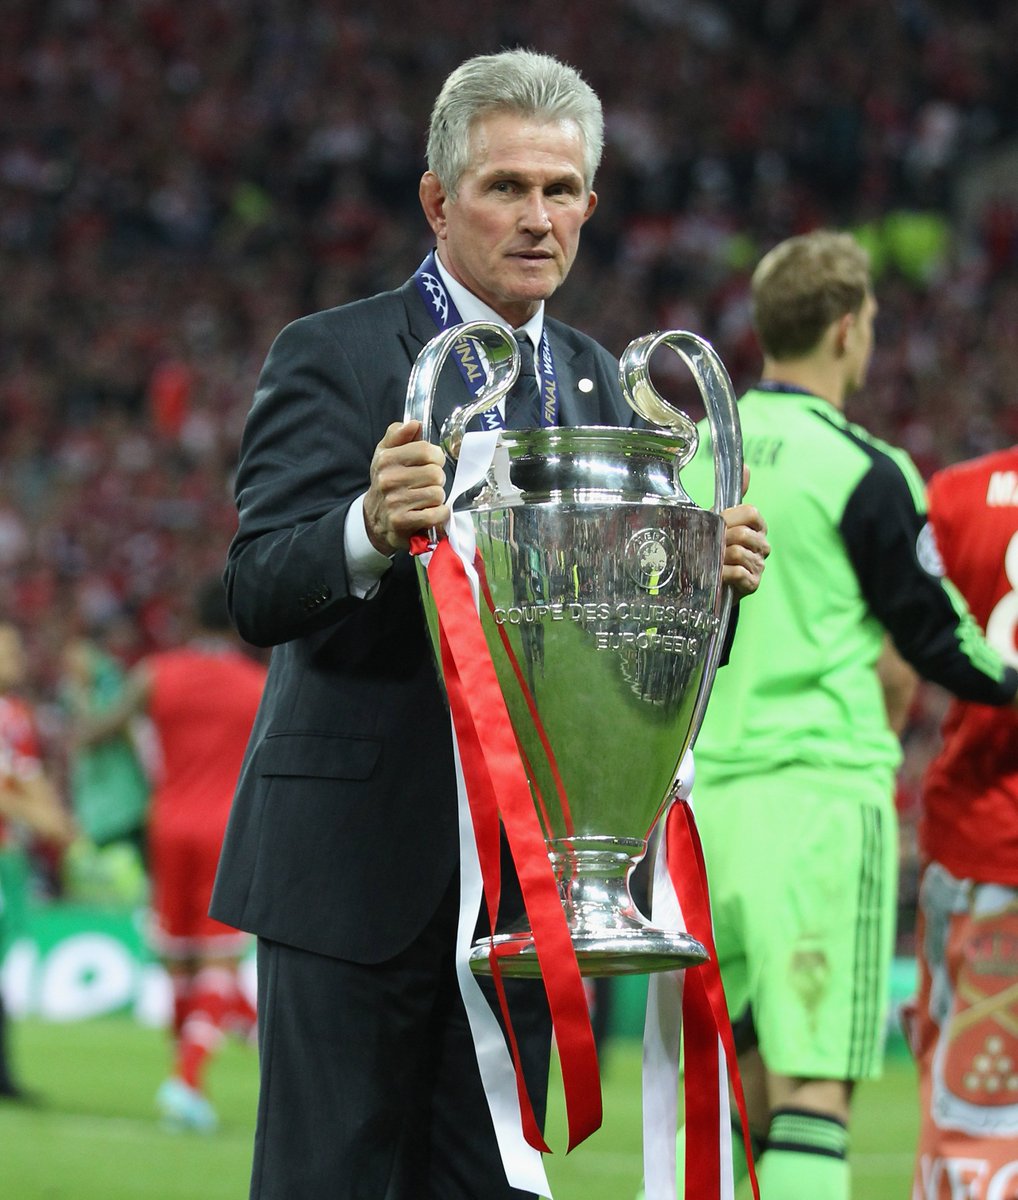 UEFA Champions League on X: "Jupp Heynckes returns to the #UCL on Wednesday as Bayern host Celtic ... his first game in the competition since the 2013 final. 🏆🎖️ https://t.co/q47vLl7nnT" / X